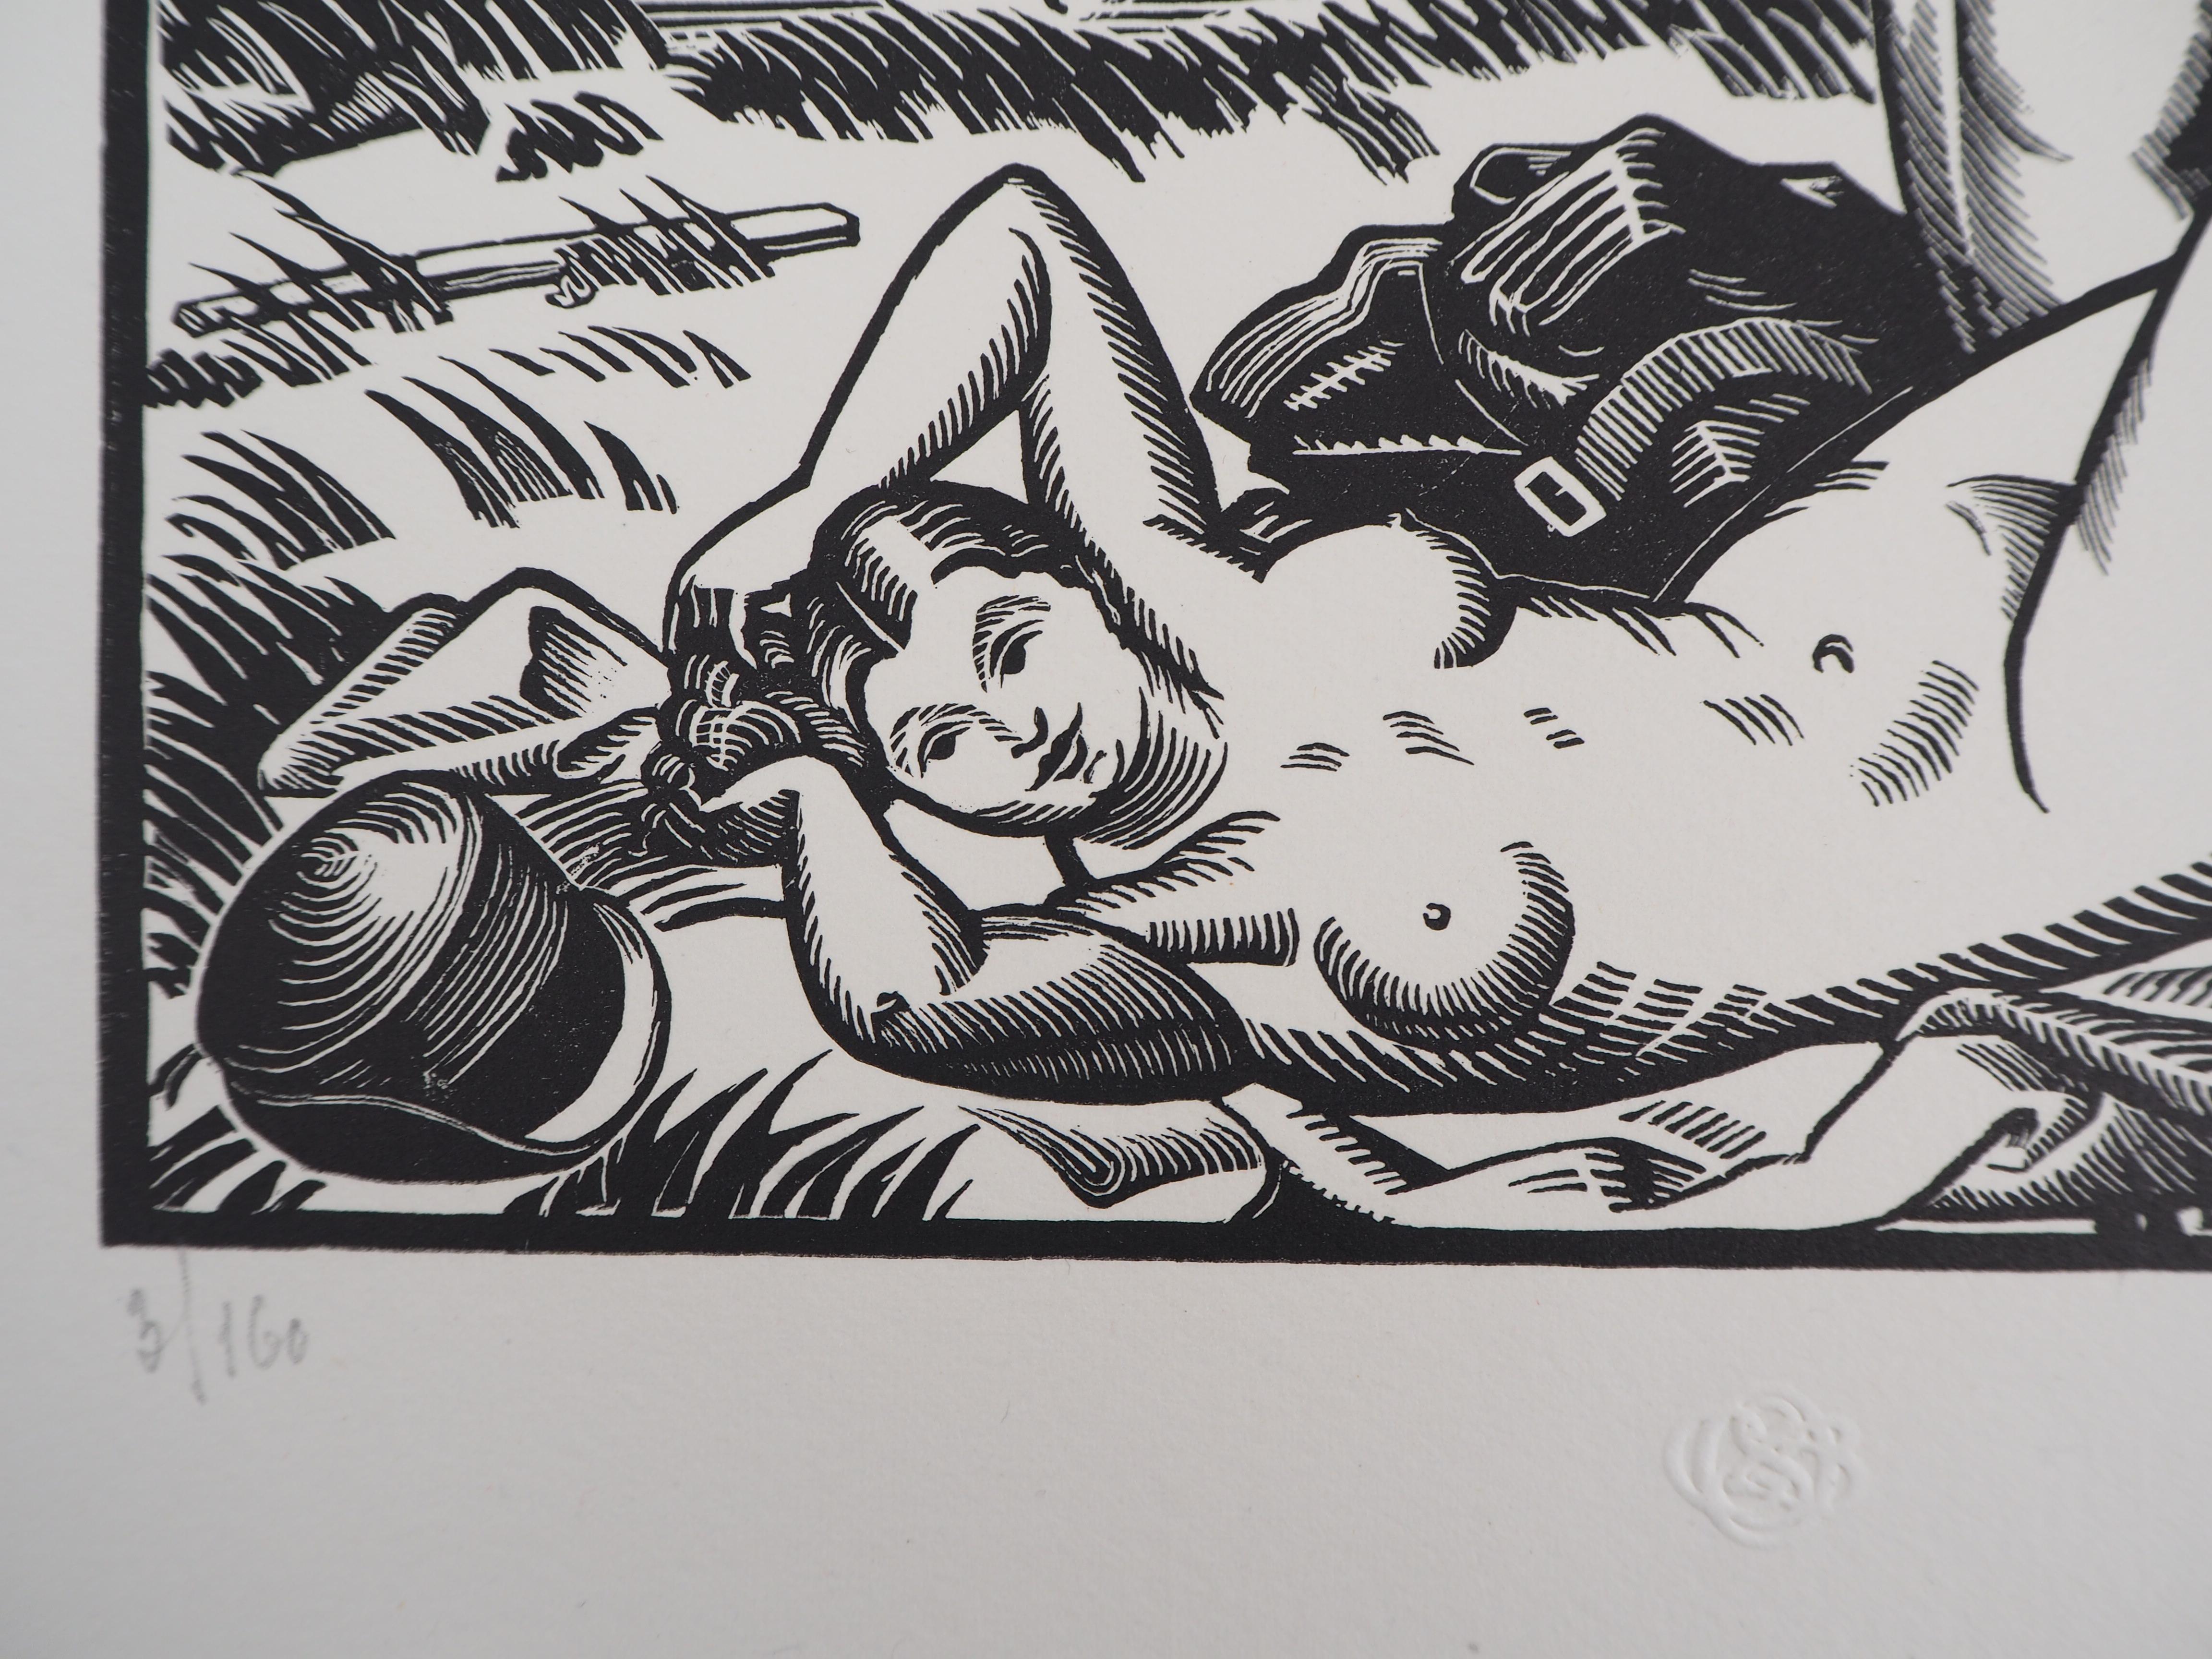 Tribute to Cezanne : The Bathers - Original wooodcut, Handsigned - Art Deco Print by Paul Vera